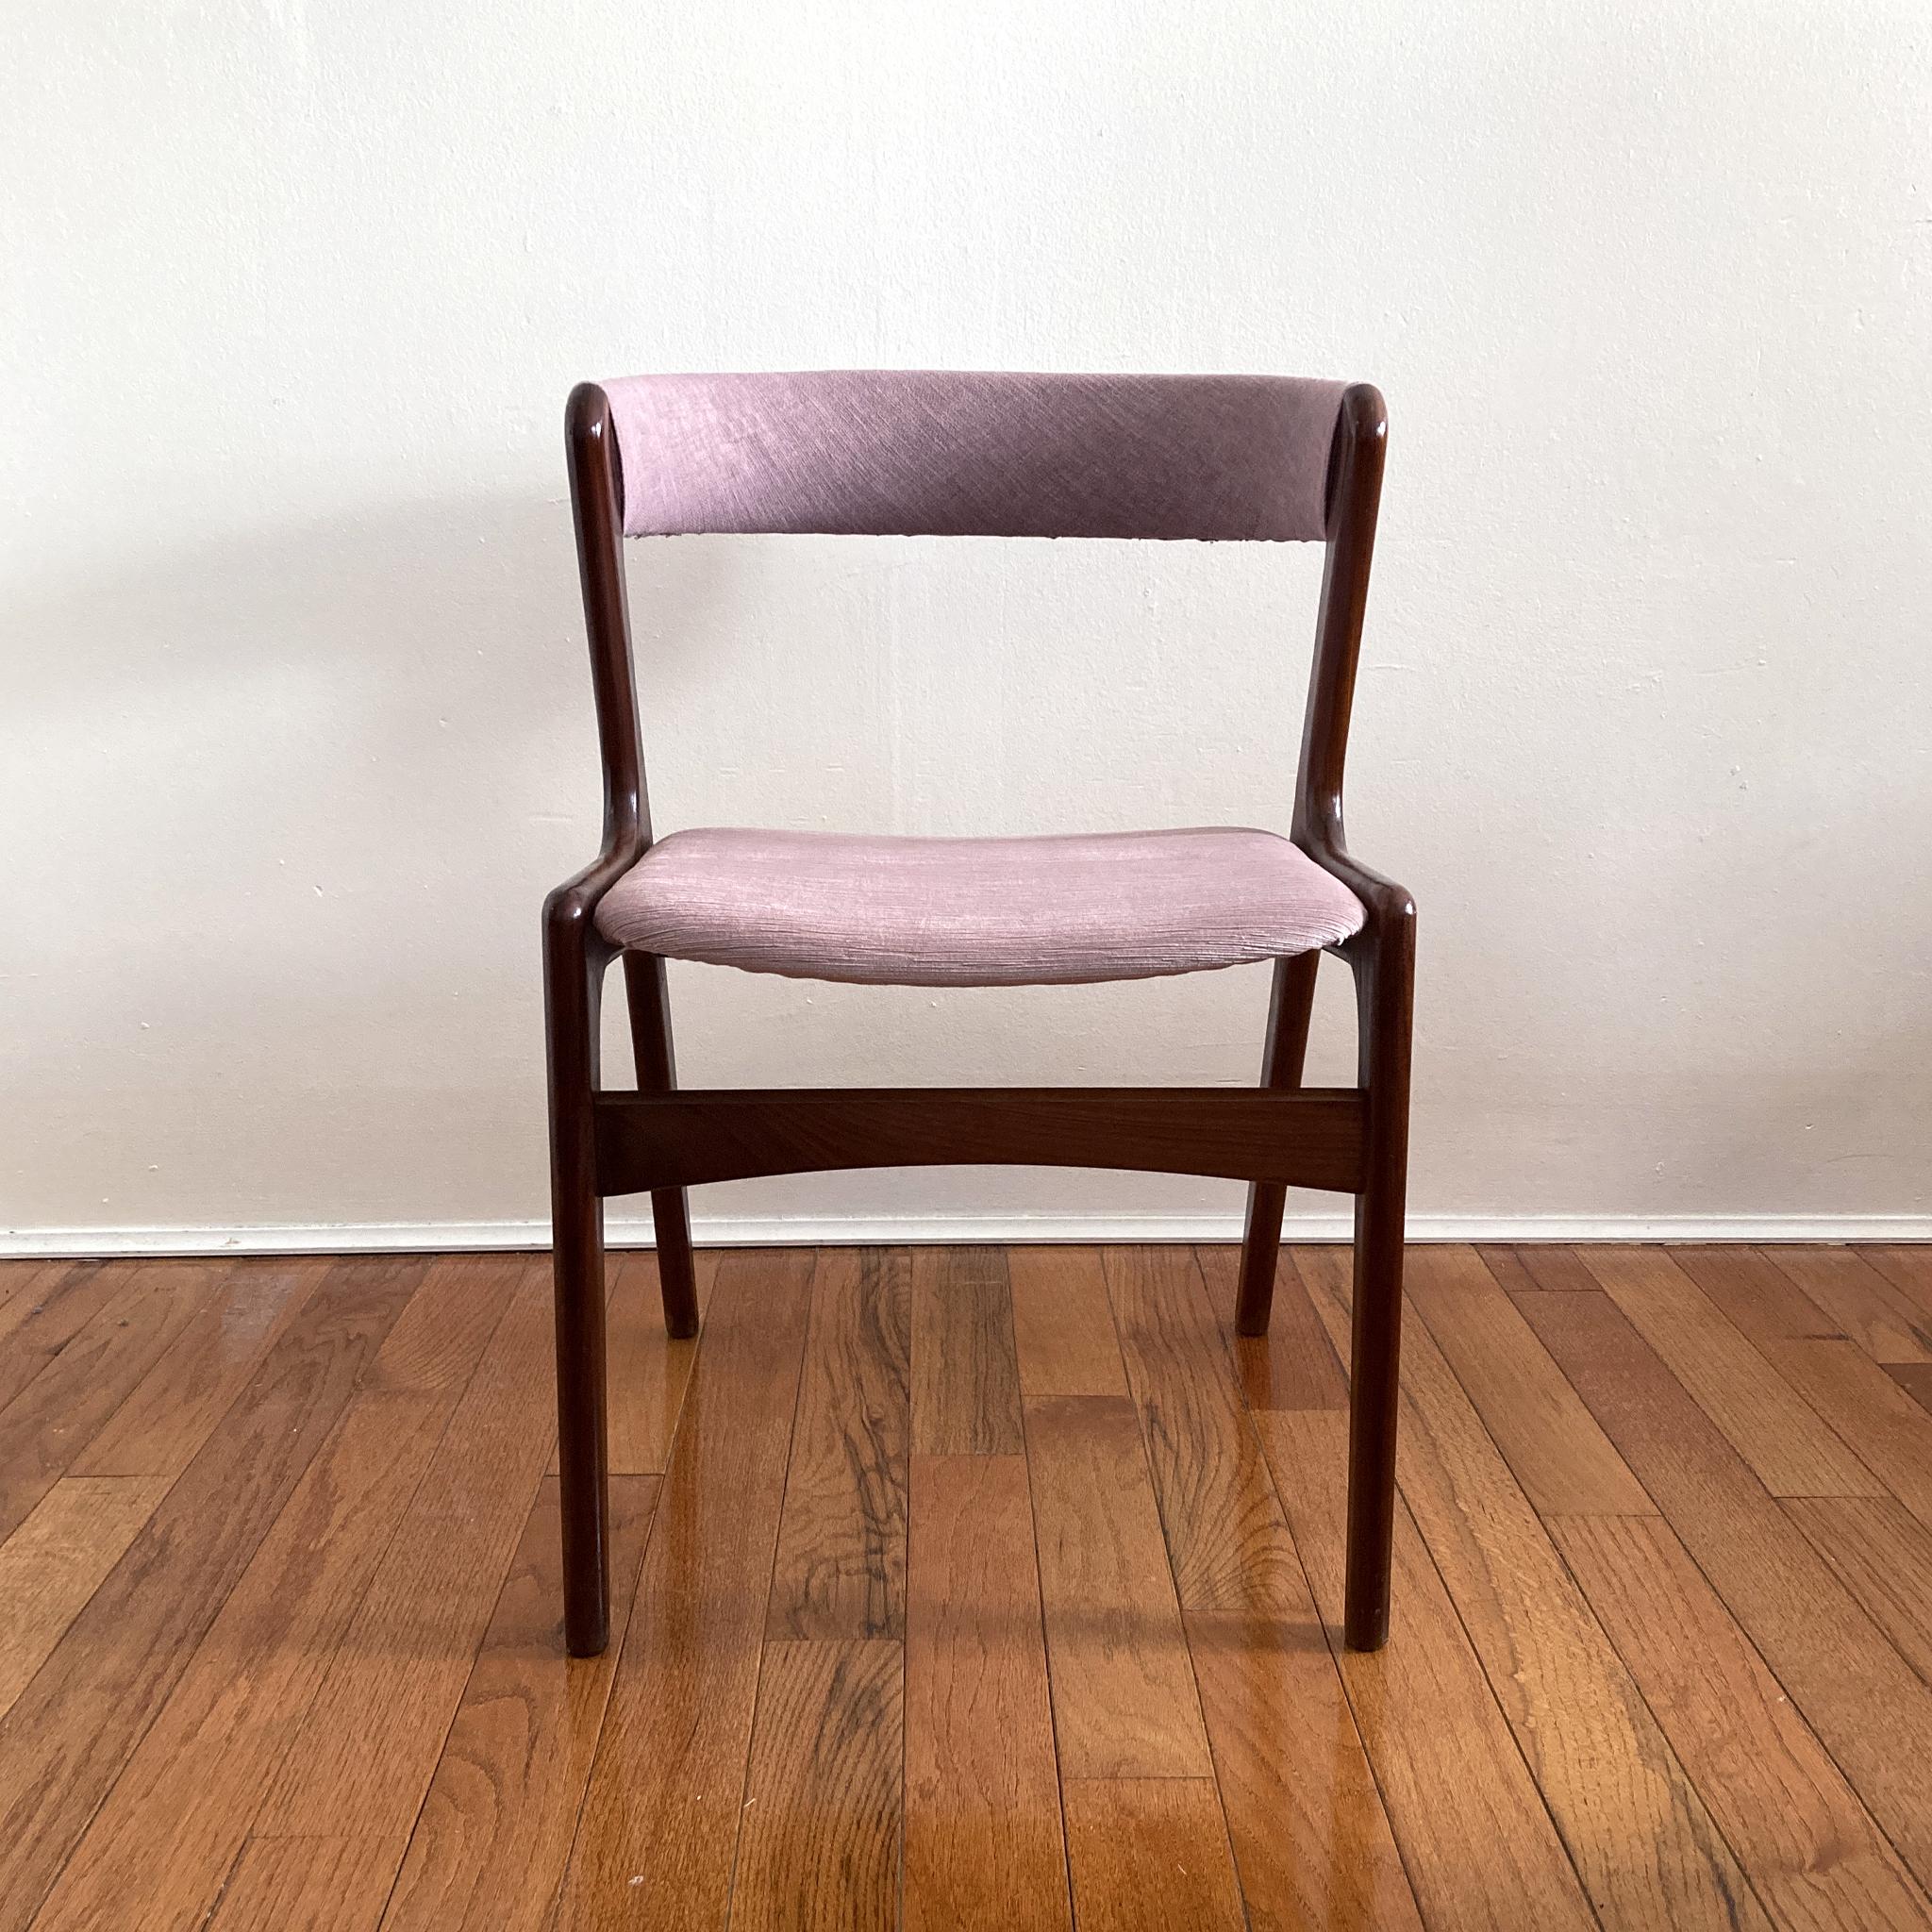 Beautiful midcentury chair, Kai Kristiansen’s iconic curved back chair Silhouette. Teak frame, seat reupholstered with mauve pink velvet and curved back reupholstered in a coordinating mauve tweed. Structurally sound, in good vintage condition with